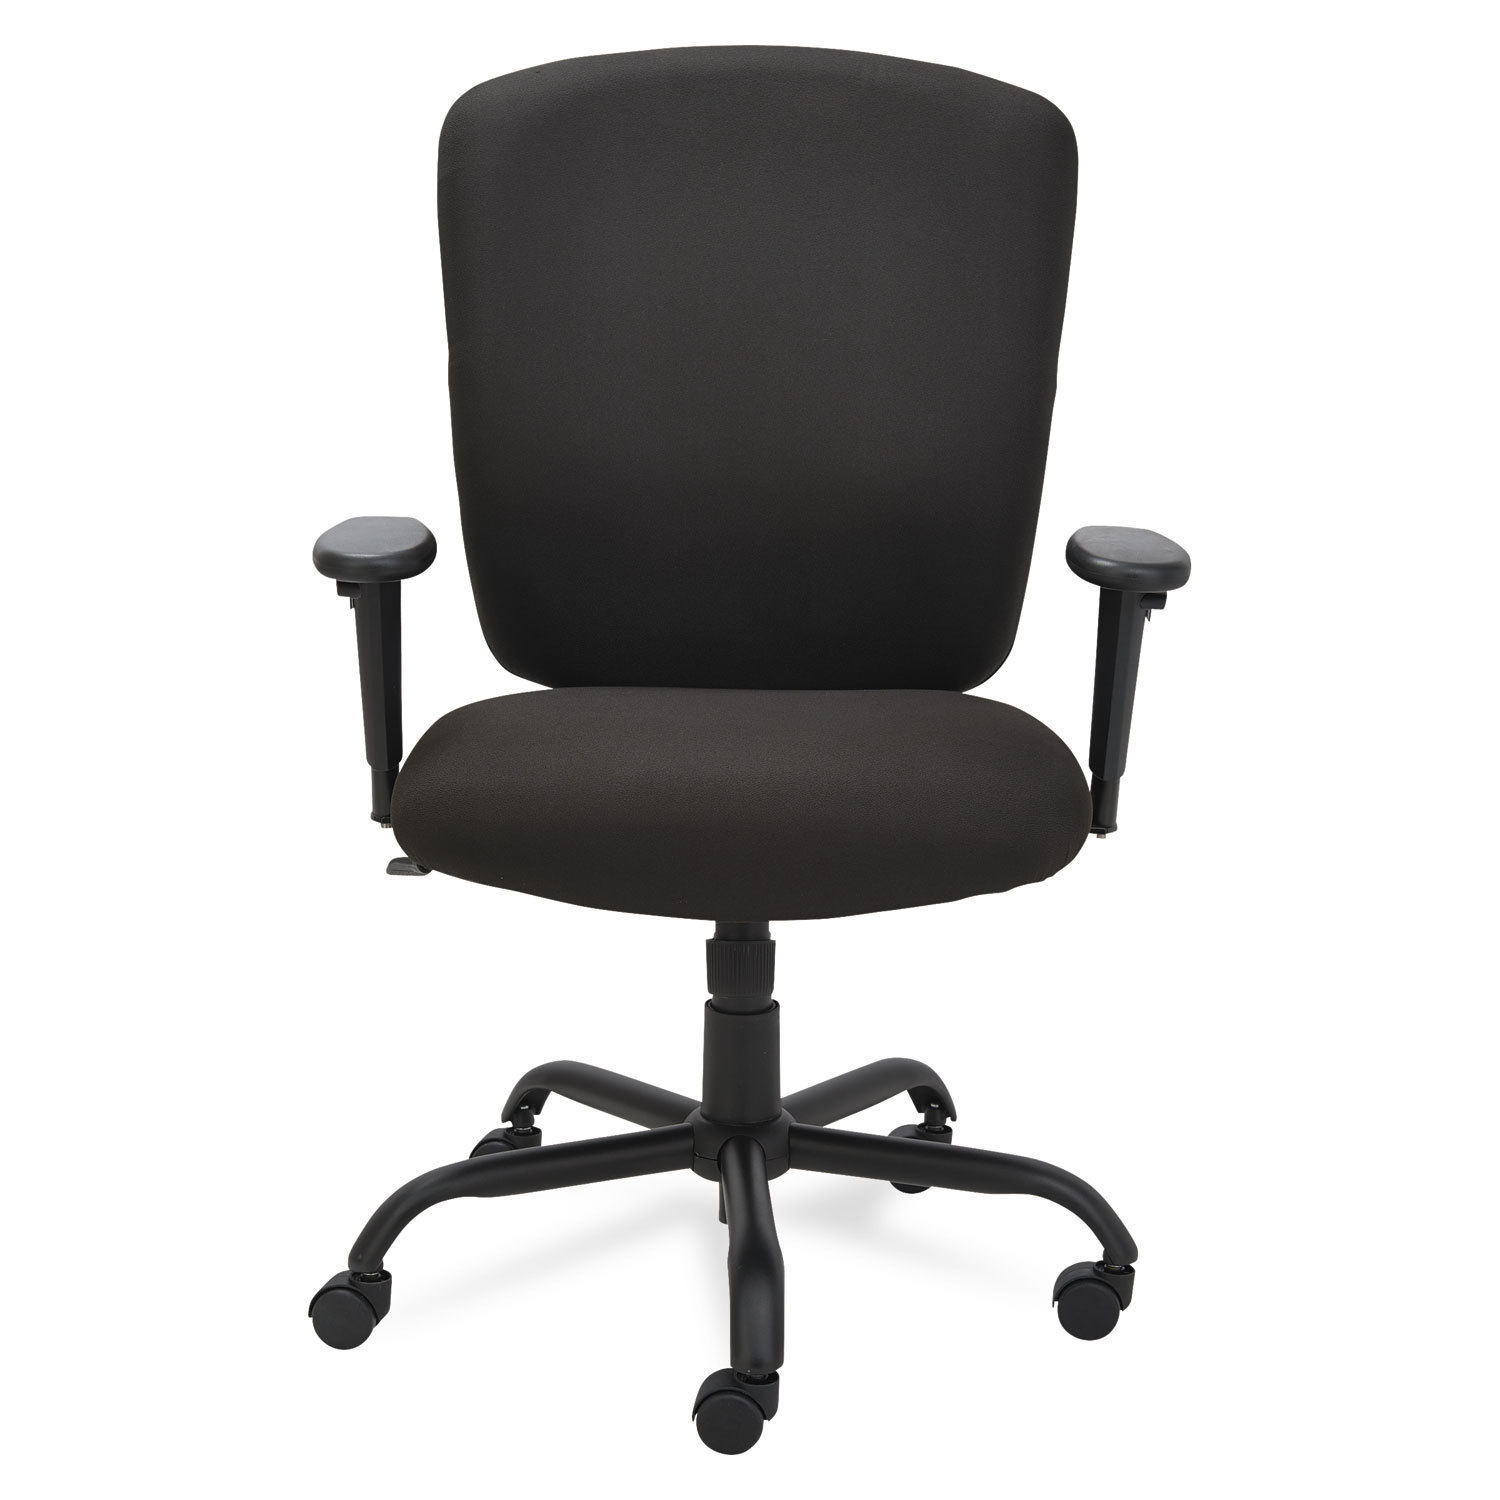 Alera Mota Series Big and Tall Chair, Supports up to 450 lbs., Black Seat/Black Back, Black Base